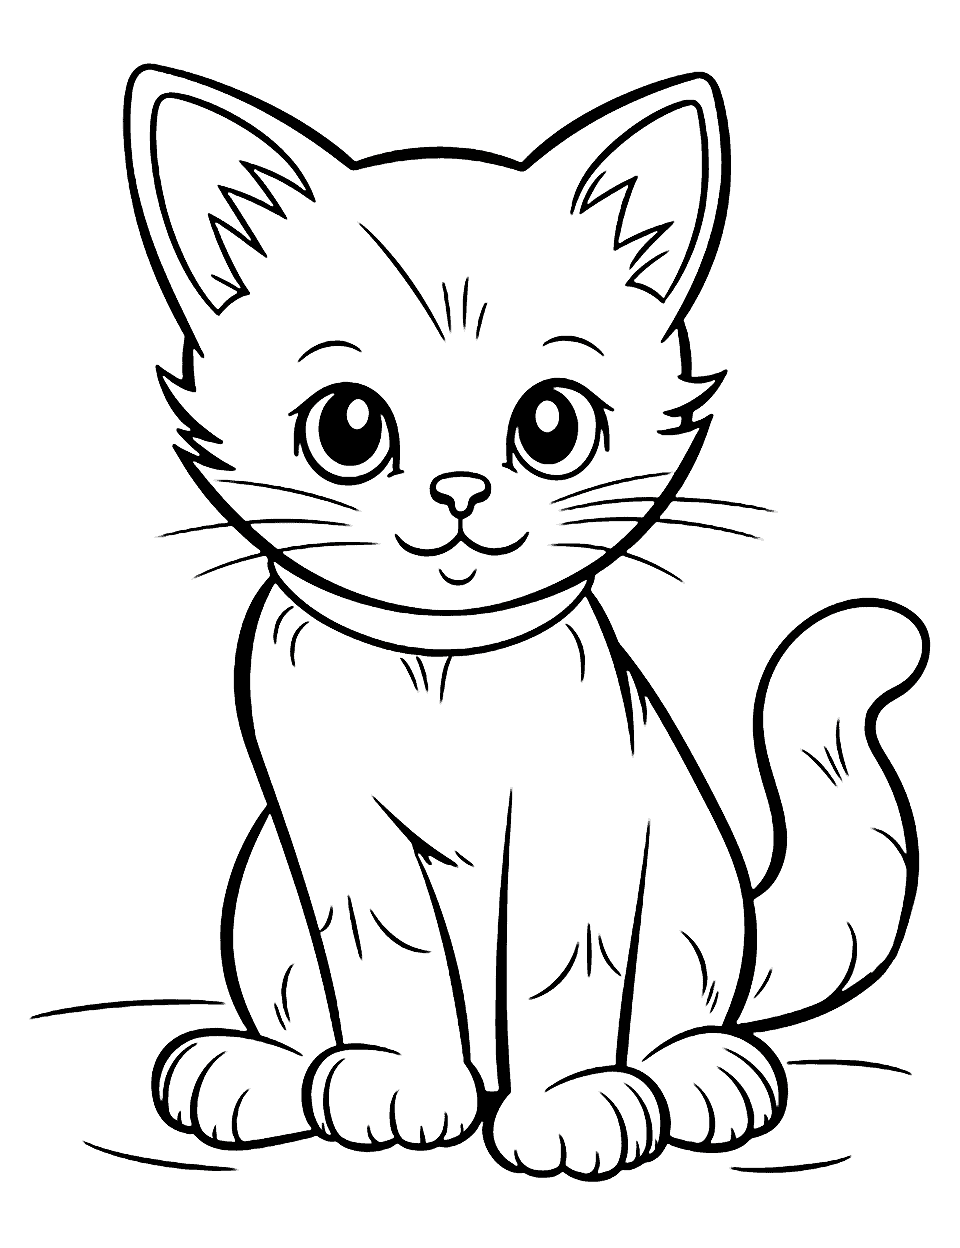 Preschool Coloring Page of a Kitten Cat - A simple and large kitten outline, perfect for preschoolers to color in.